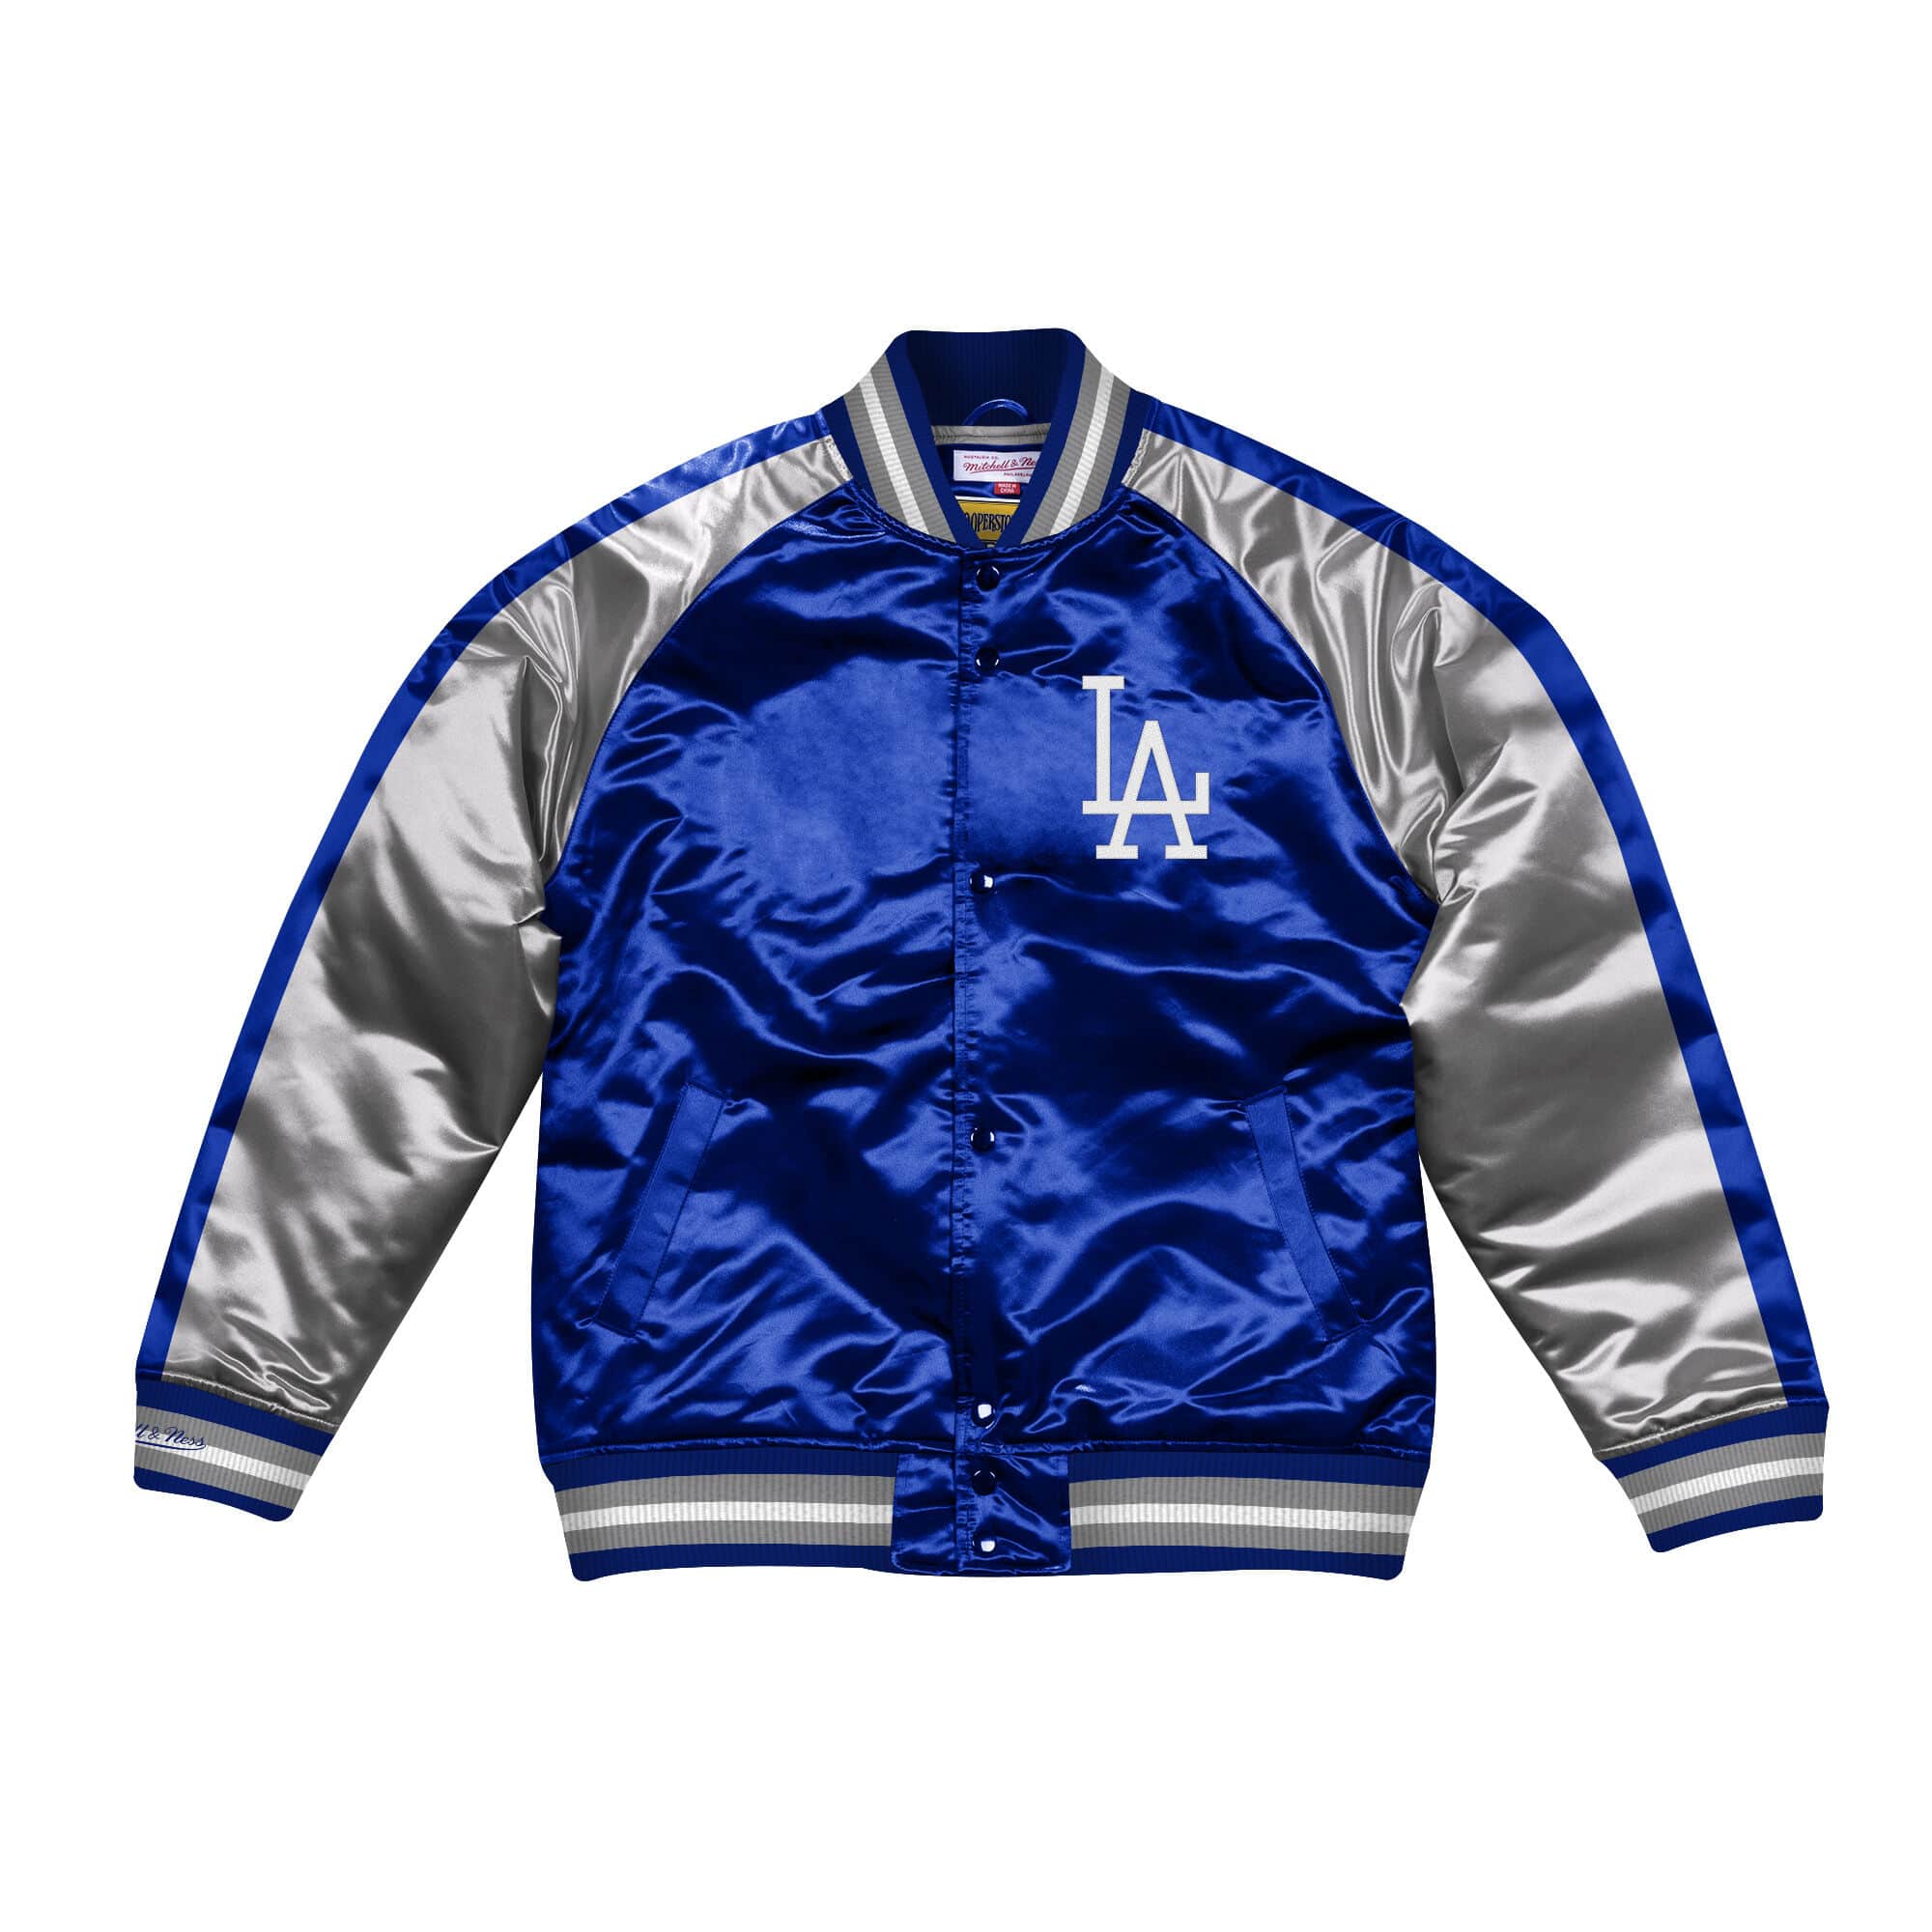 Mitchell & Ness Los Angeles Dodgers Big Time T-Shirt